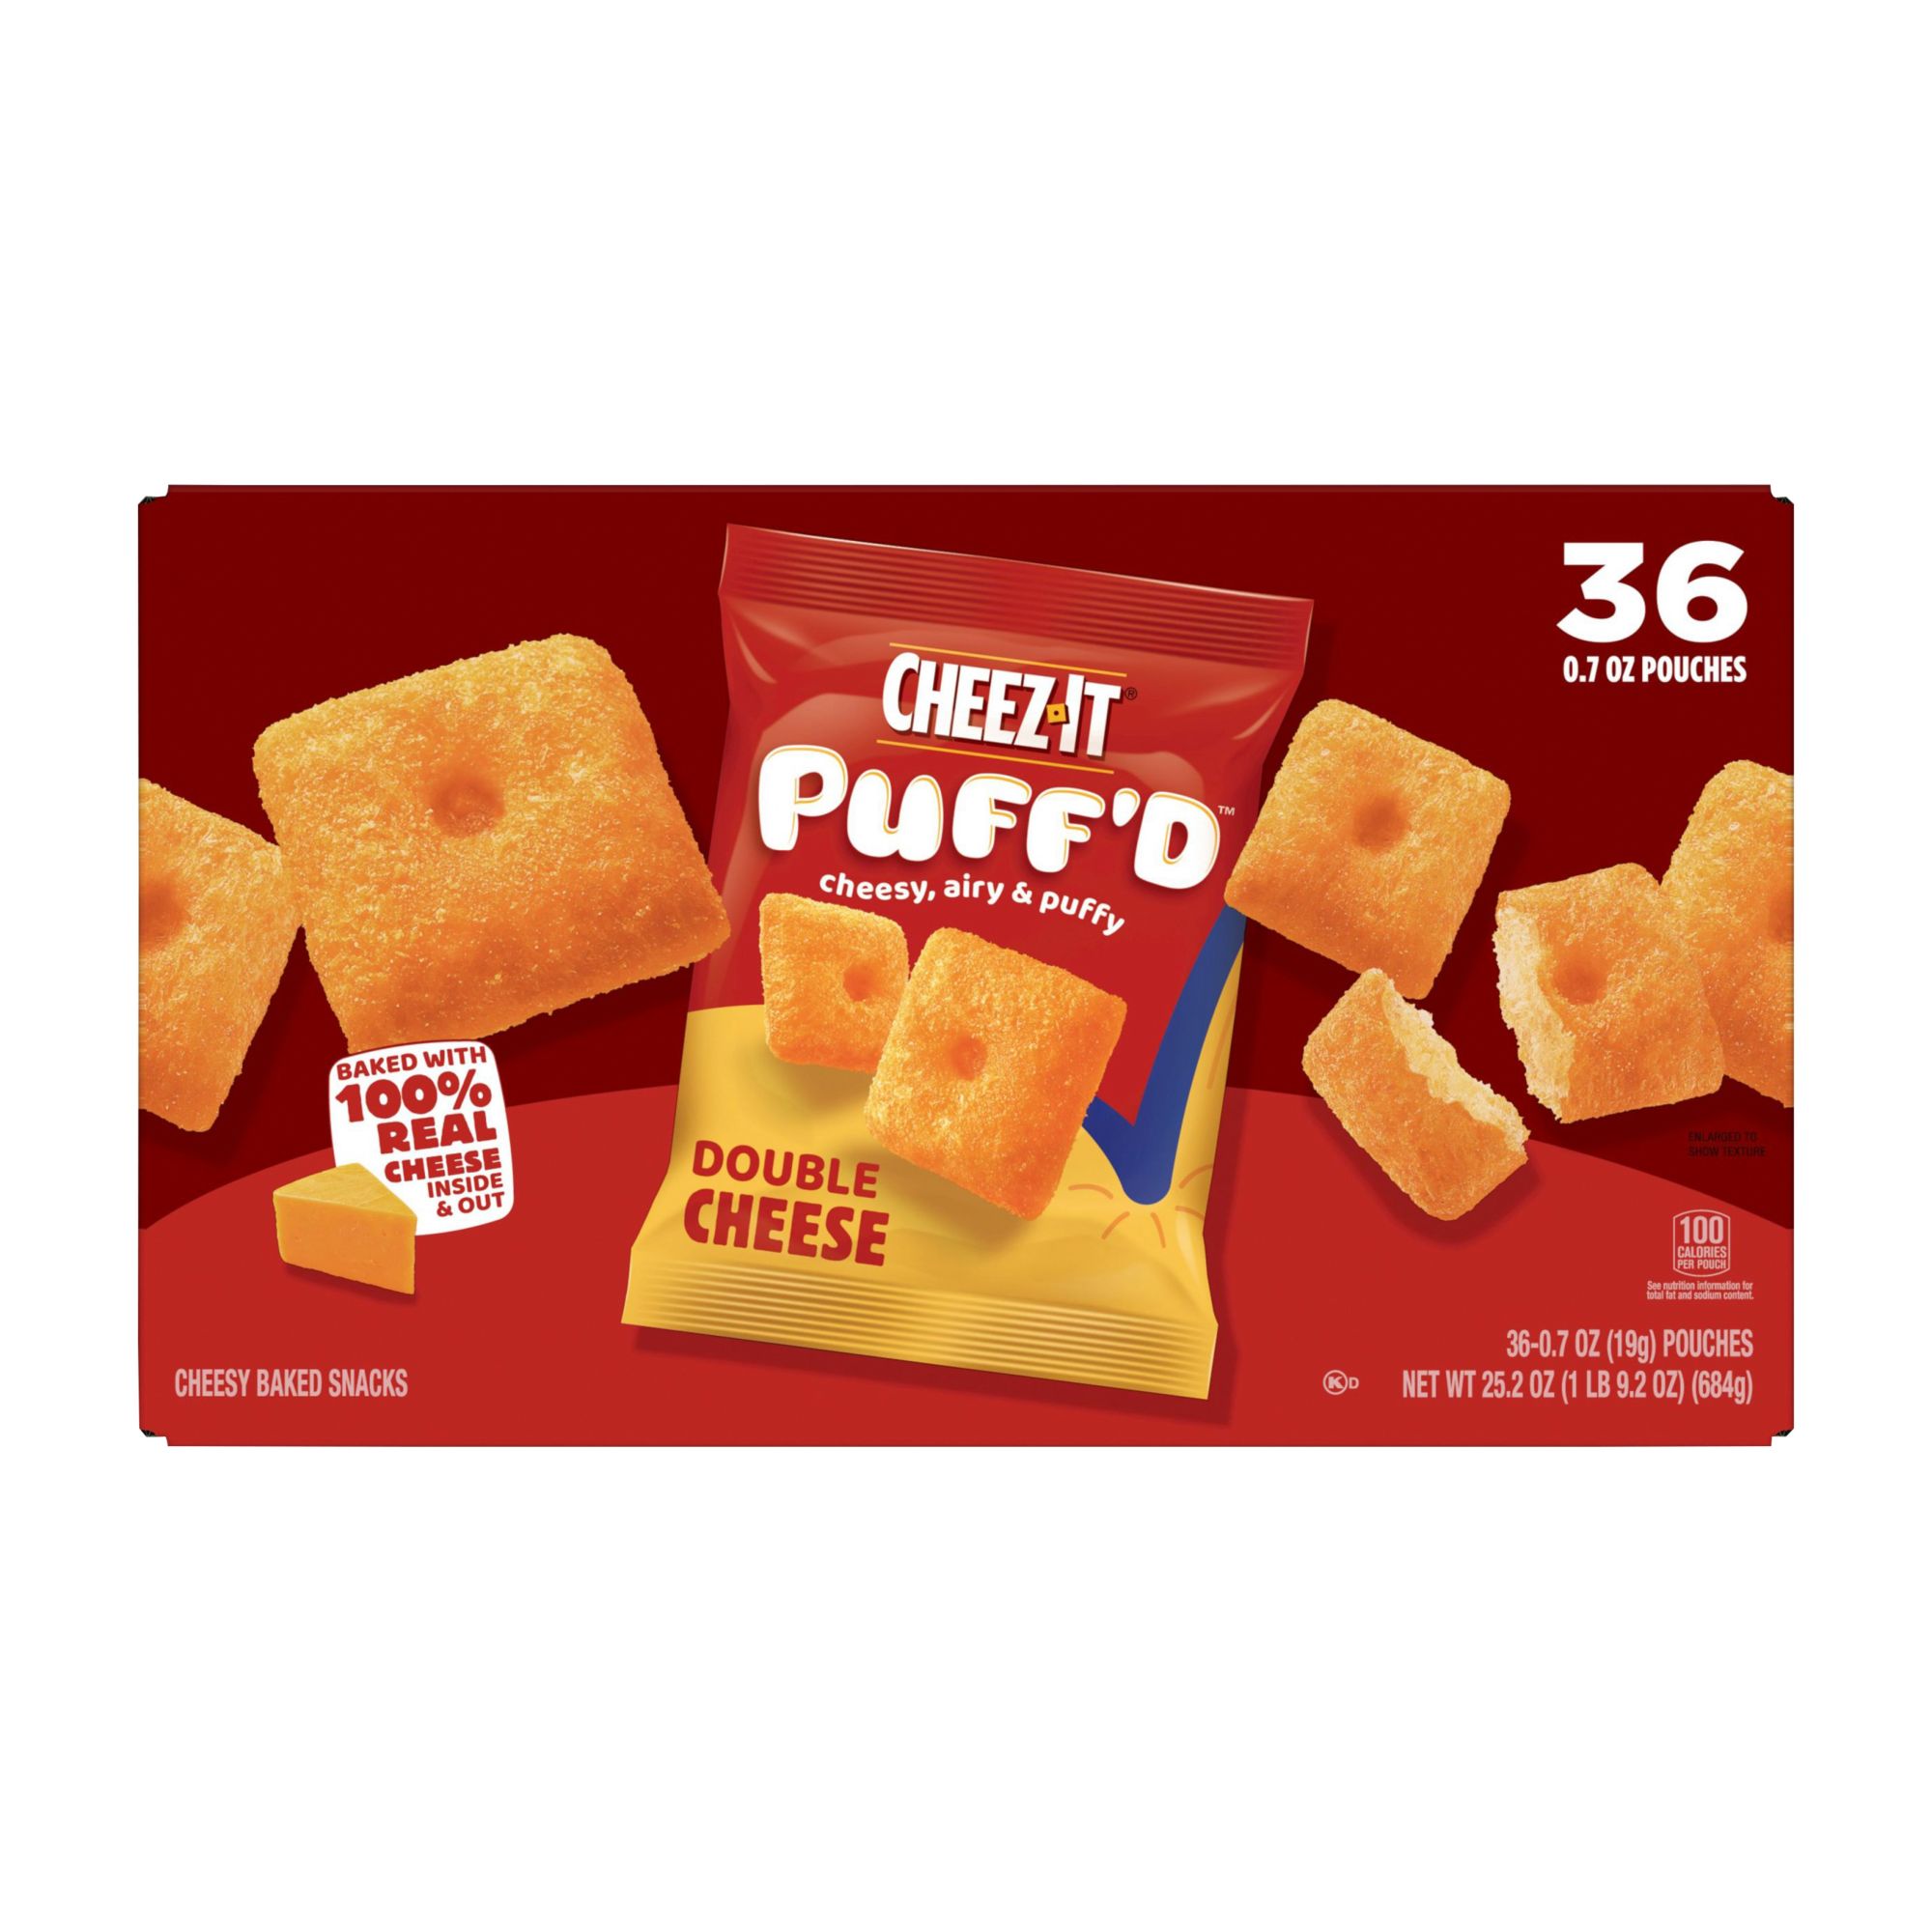 Cheez-It Double Cheese Puff'd Cheesy Baked Snacks, 36 pk./0.7 oz.